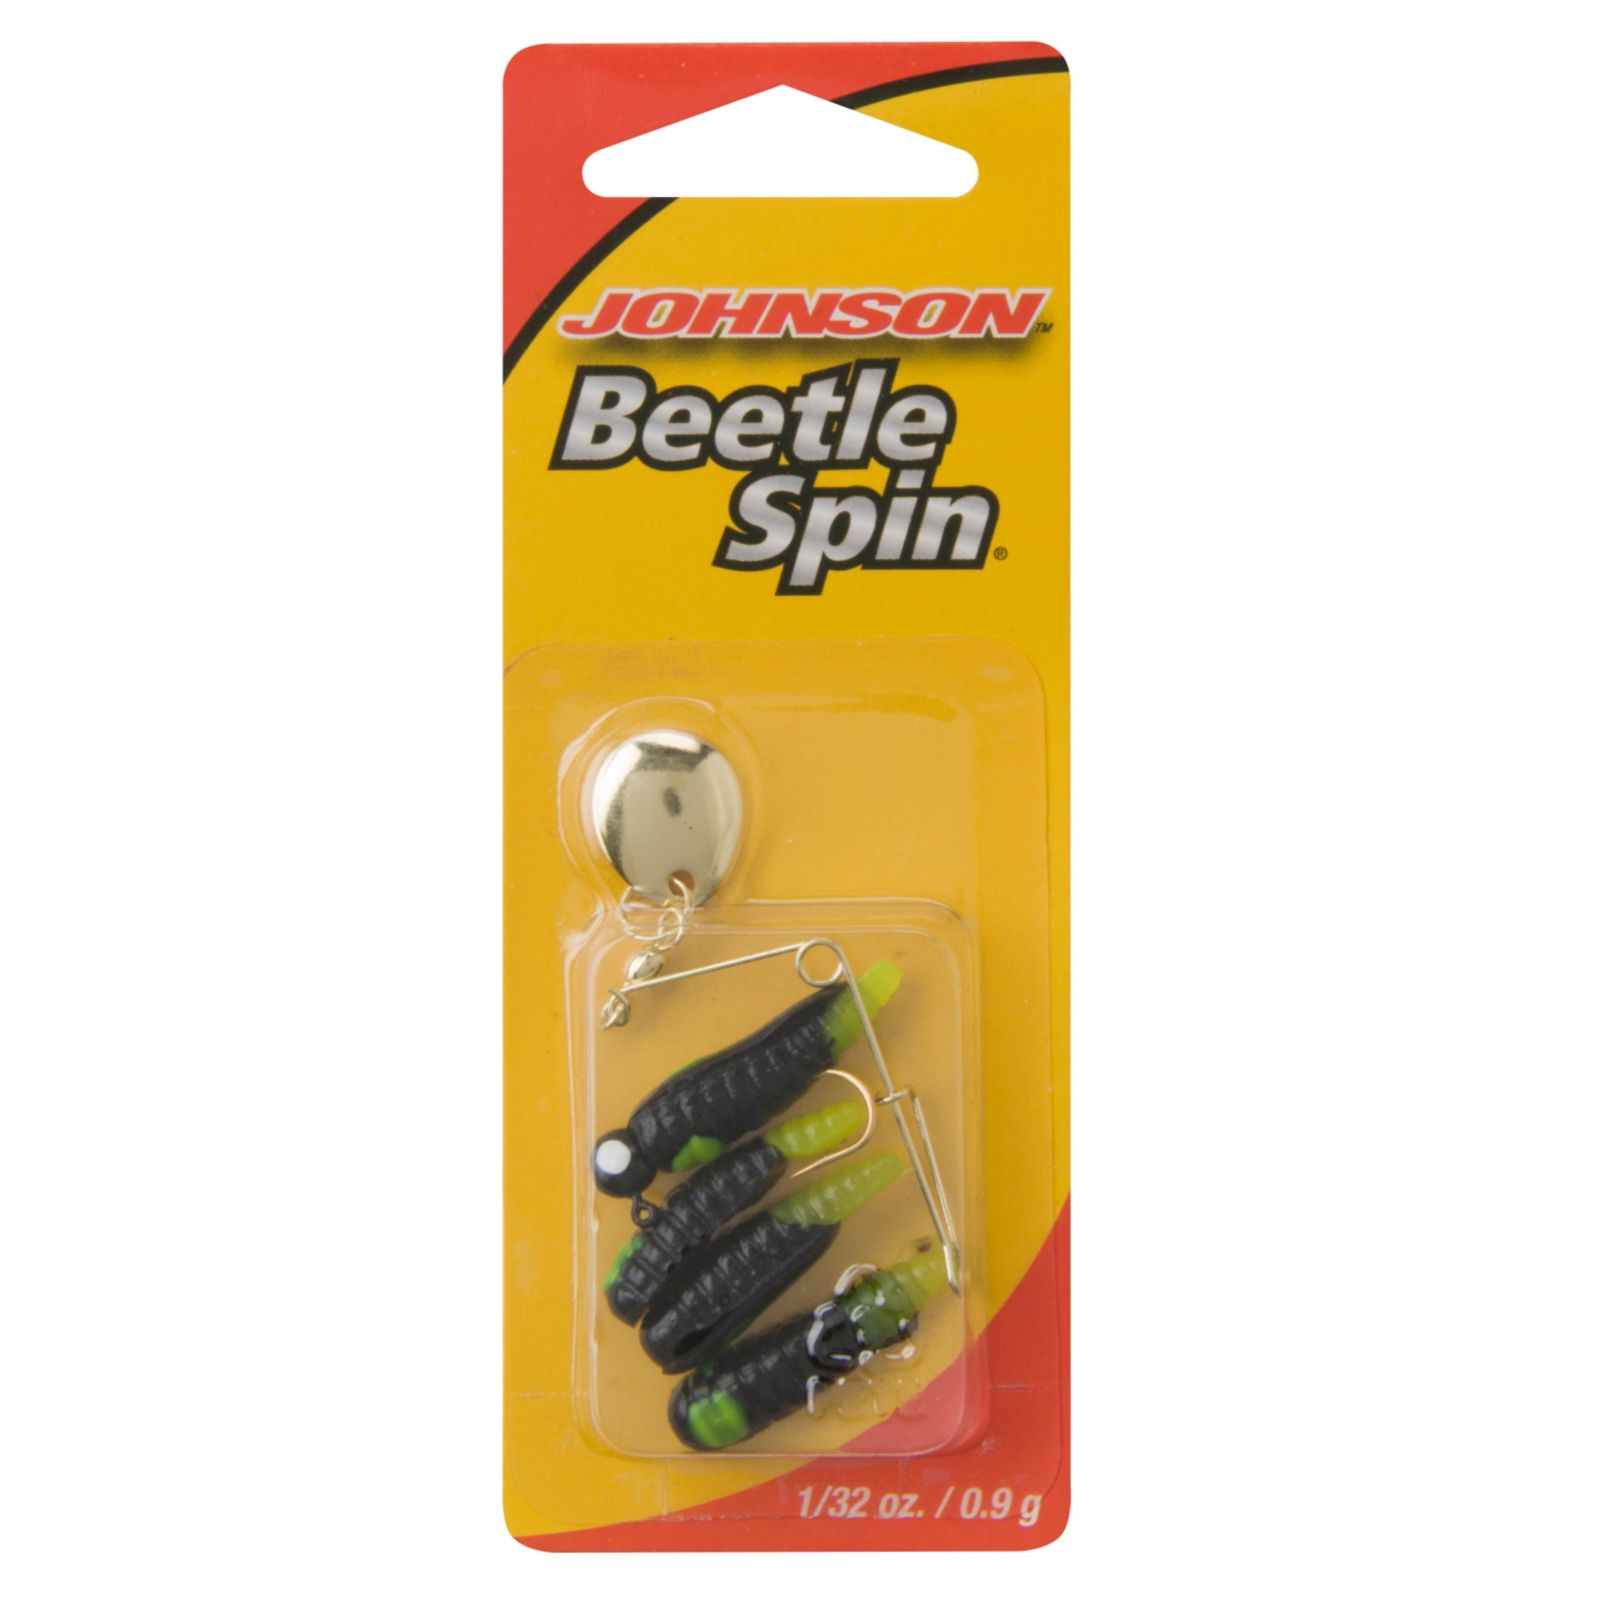 Johnson Beetle Spin Colored Blade - BSVPO18-BCO Bahrain